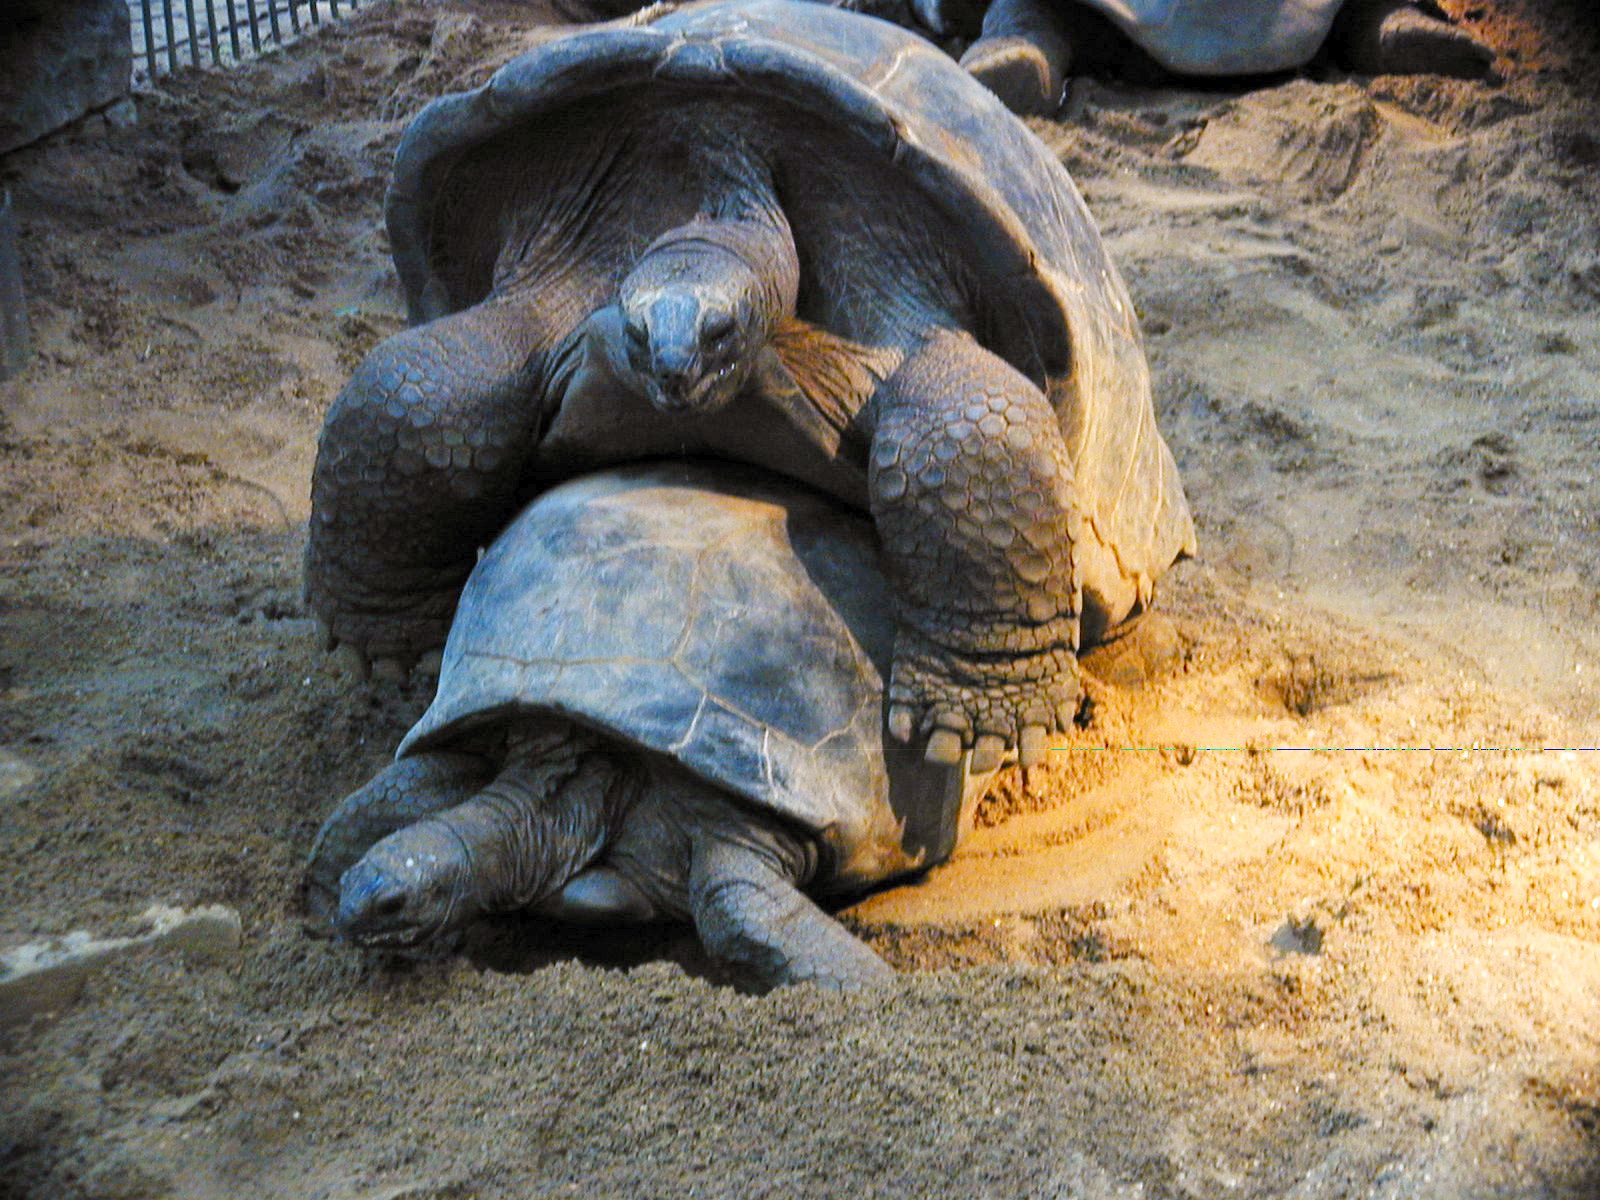 turtels making love sex (always good for the hits:)) animals sea animals armor